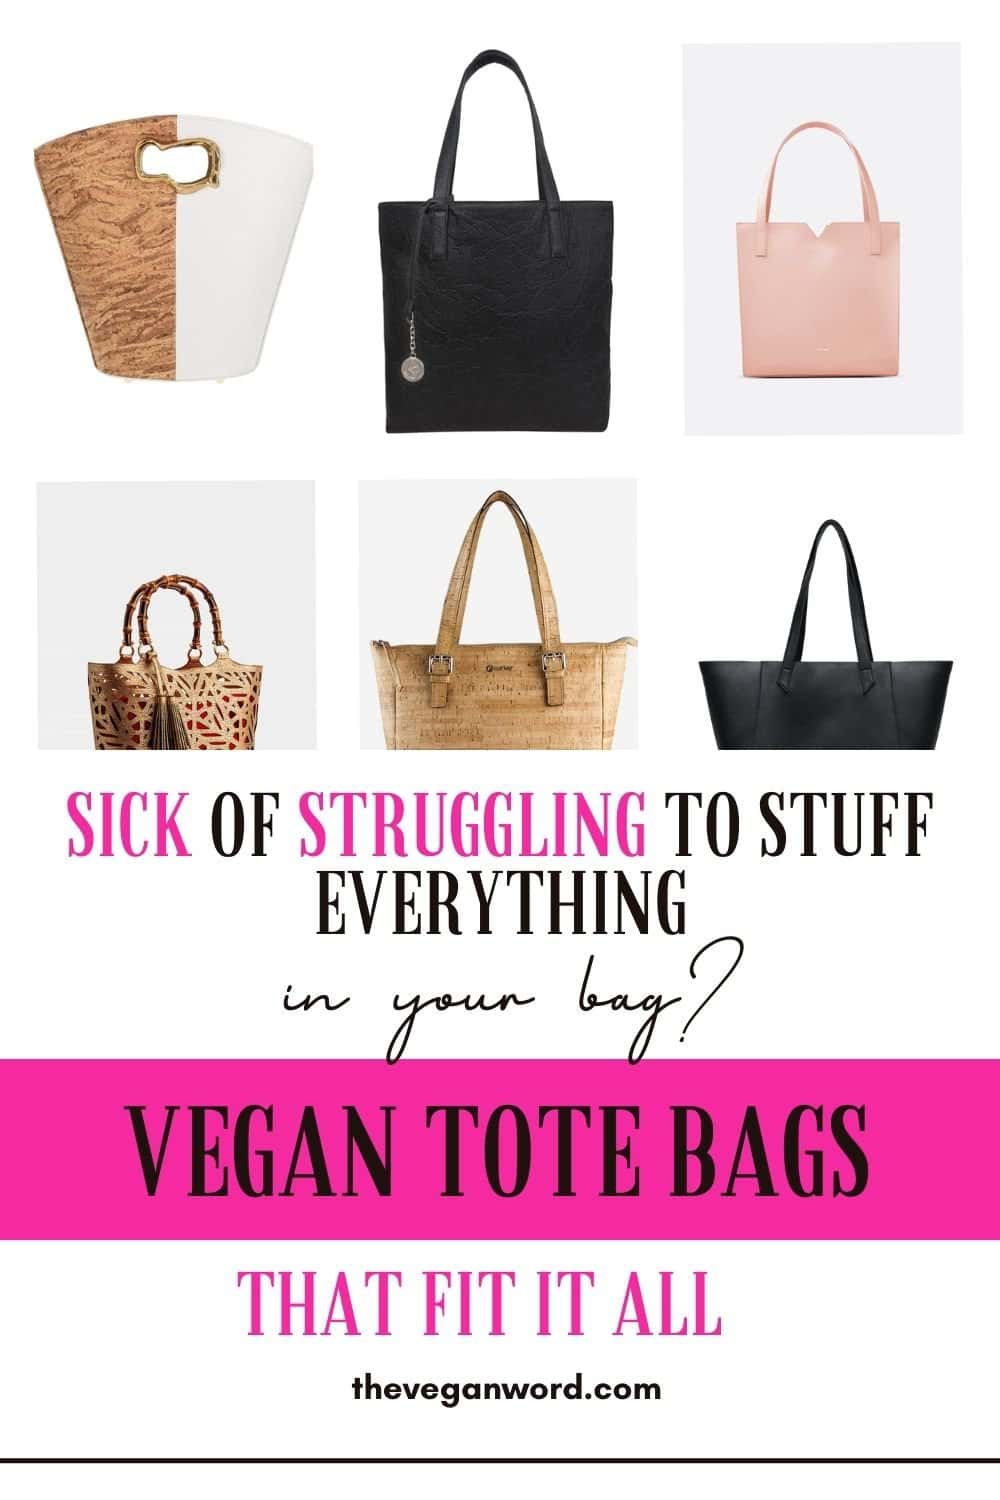 Pinterest image of different tote bags with text that reads "sick of strugglign to stuff everything in your bag? vegan tote bags that fit it all"